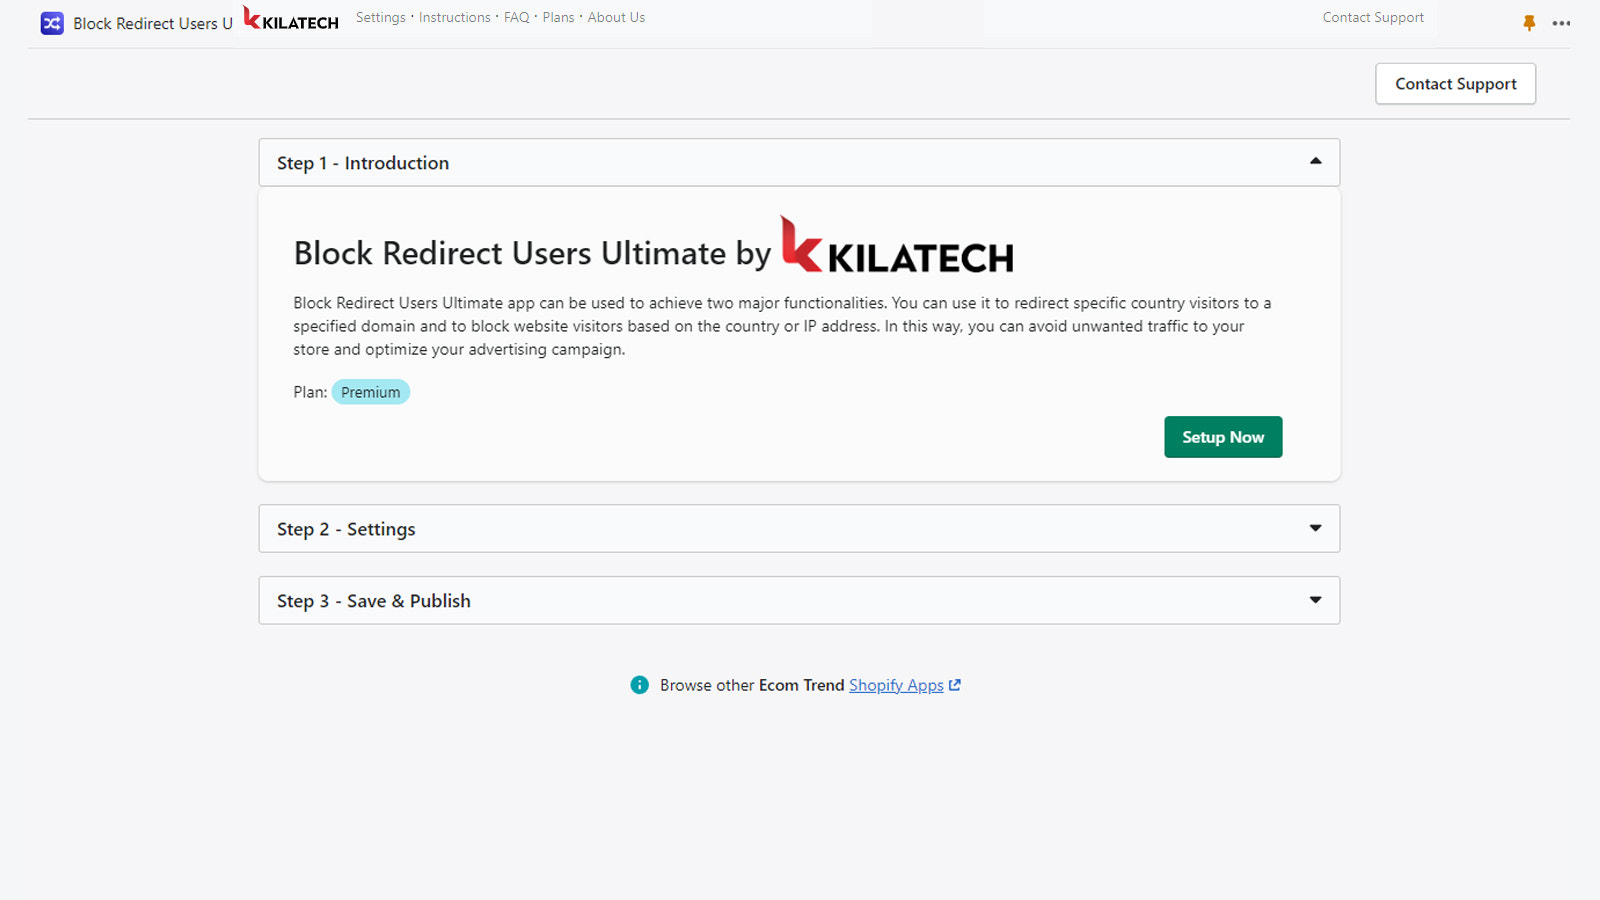 Block redirect users ultimate settings page